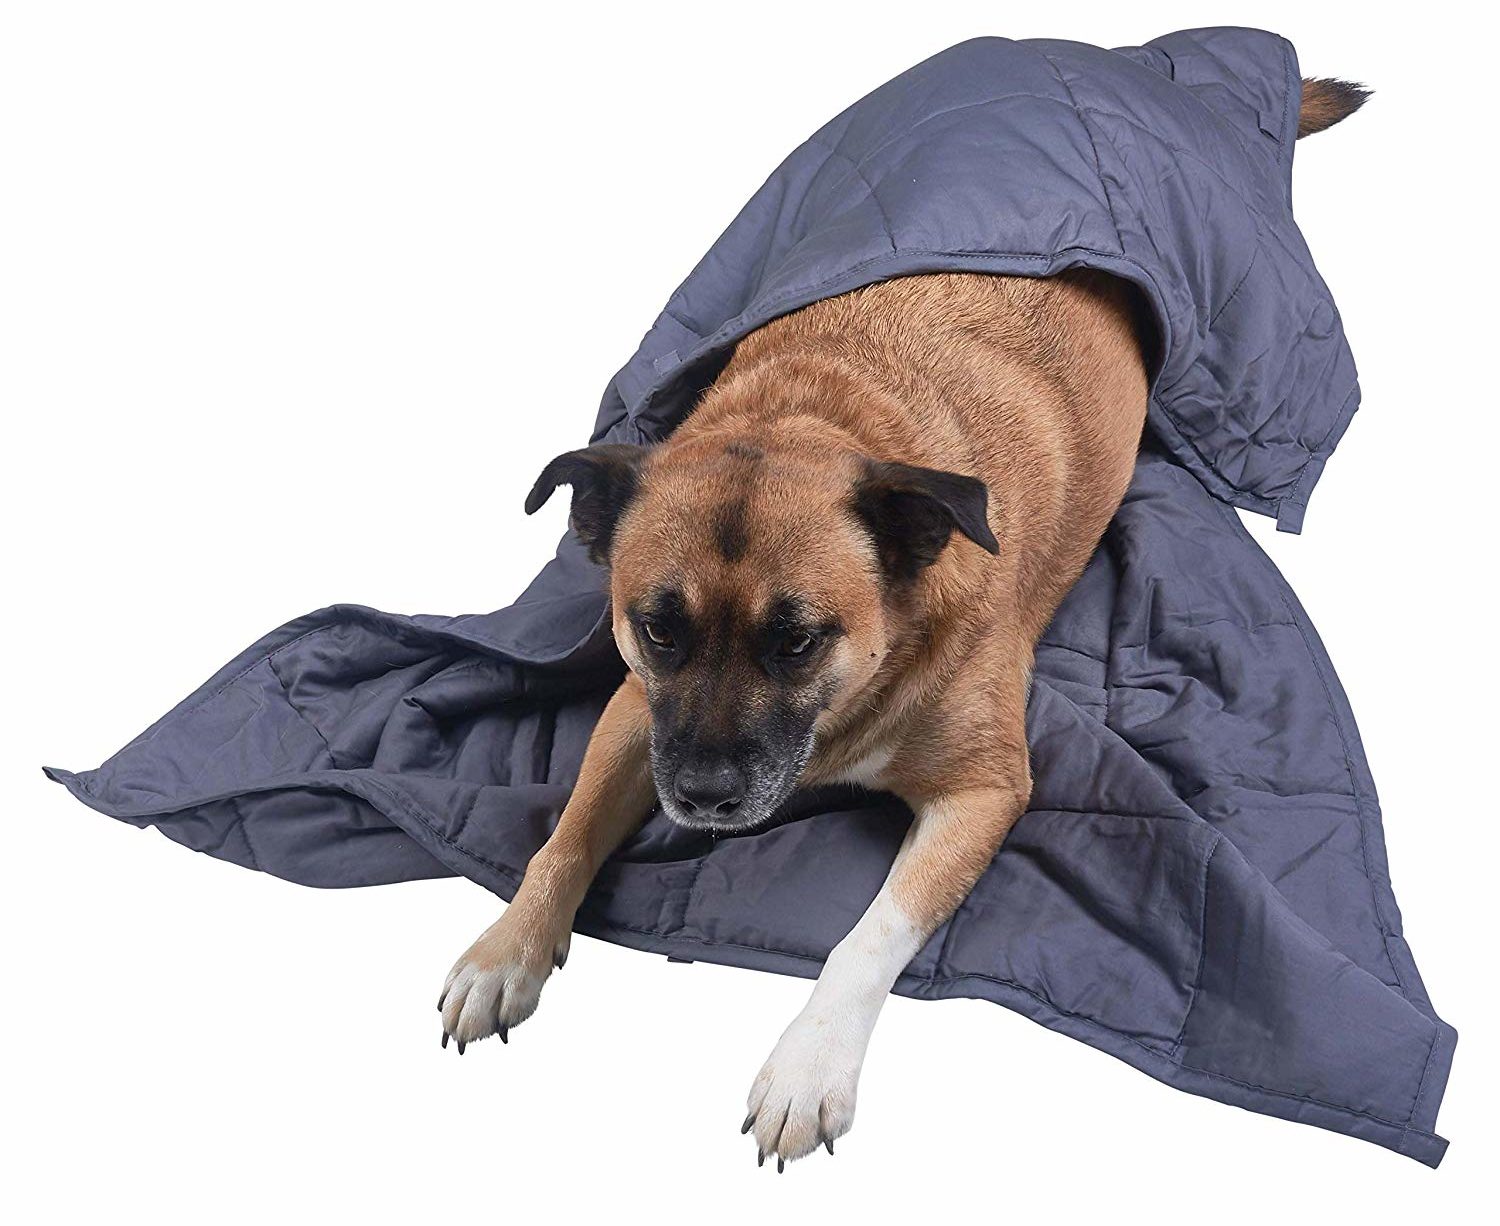 Best Gifts for Dog Lovers 2023: Weighted Anxiety Blanket for Christmas 2023